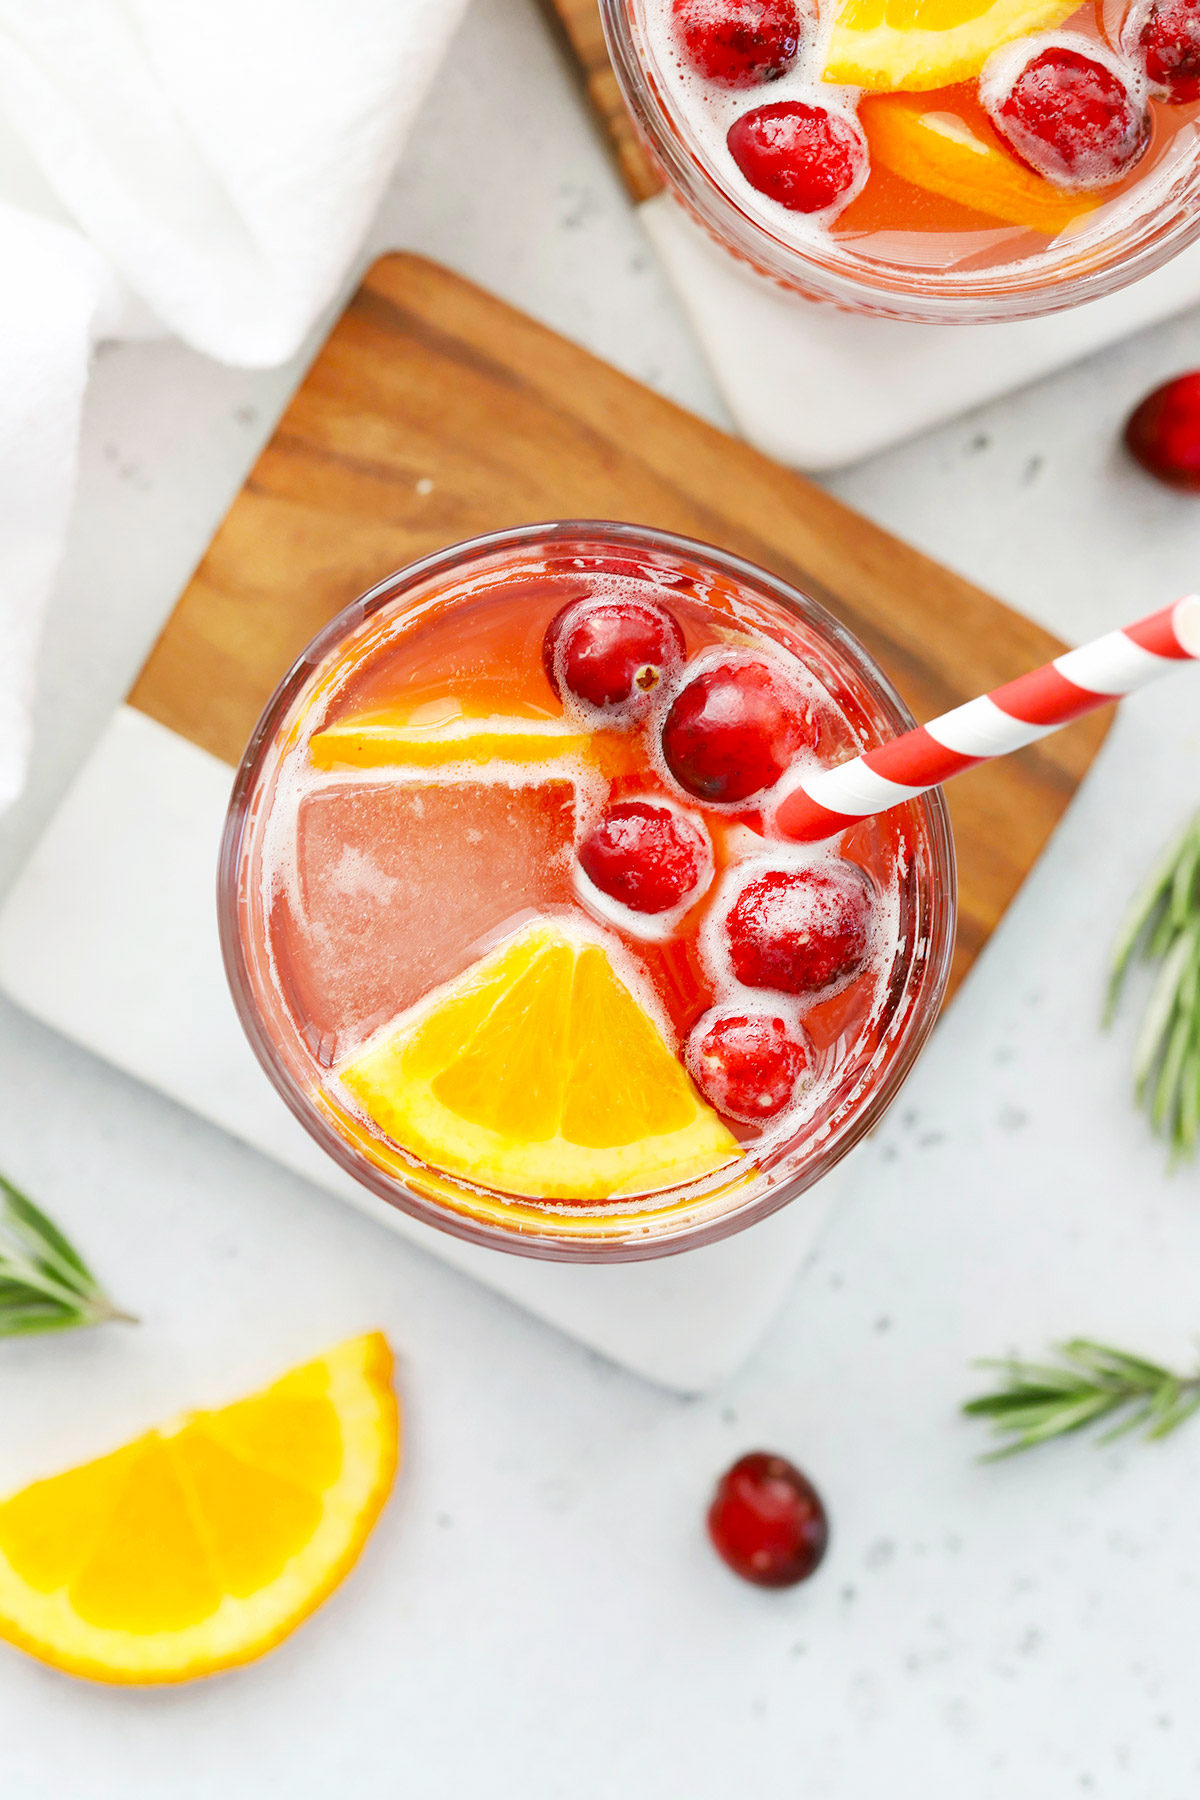 Overhead view of a Cranberry Cider Mocktail garnished with orange wedges and cranberries on a marble and wood coaster on a white background